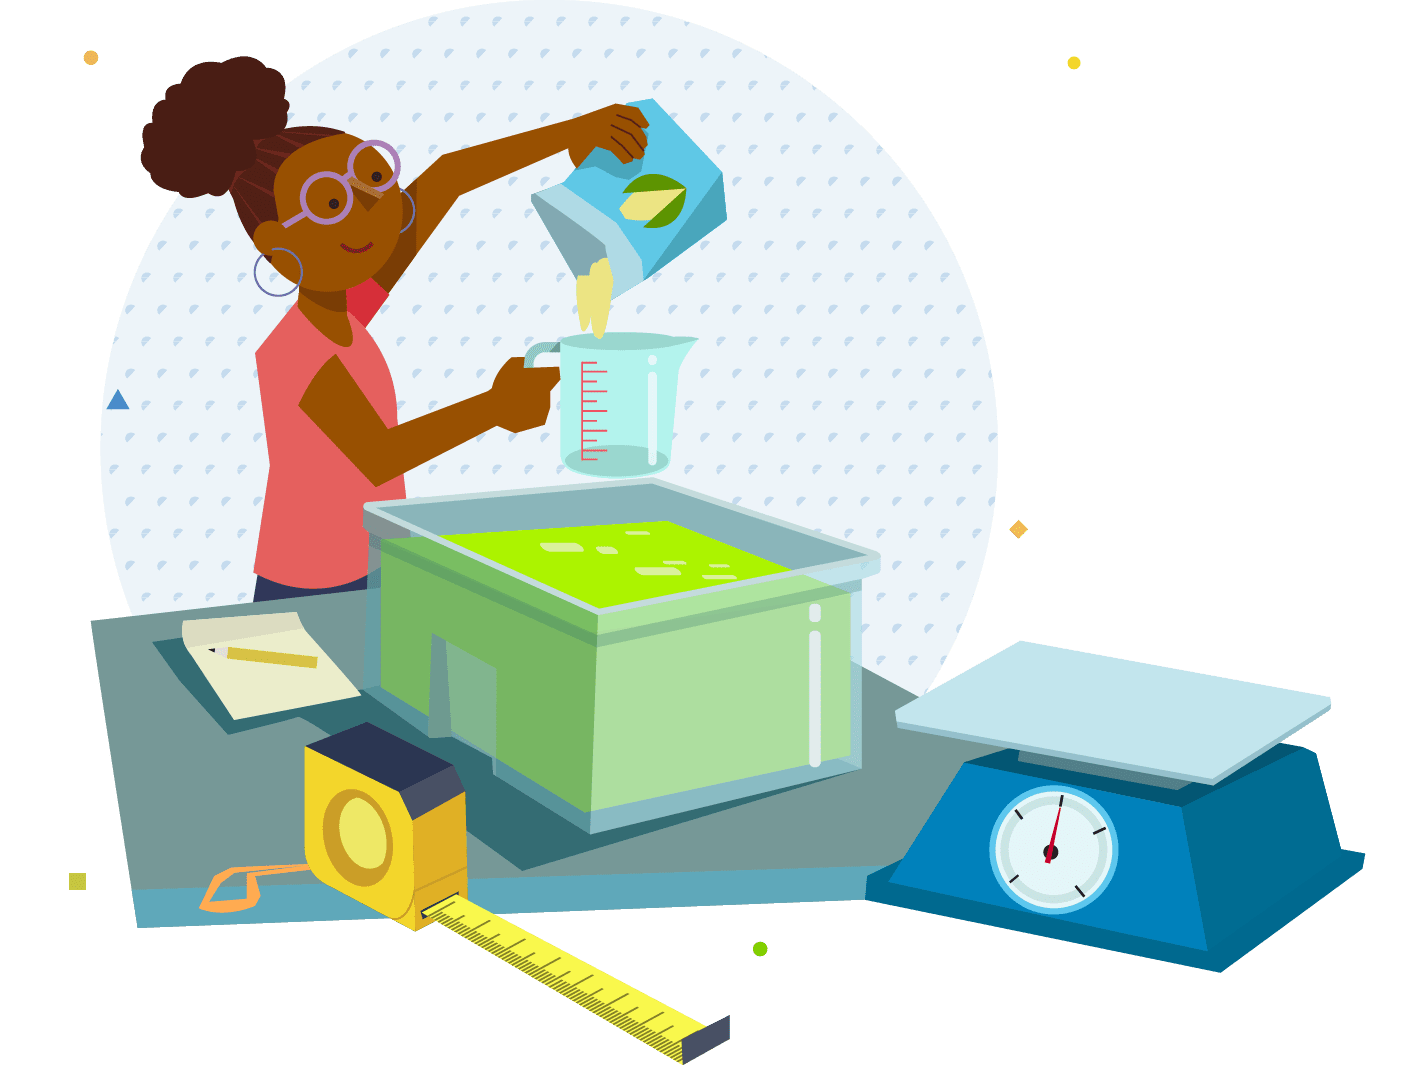 A young girl solving a K-12 mathematics problem by pouring liquid into a container, surrounded by various lab equipment like a scale and measuring tape.